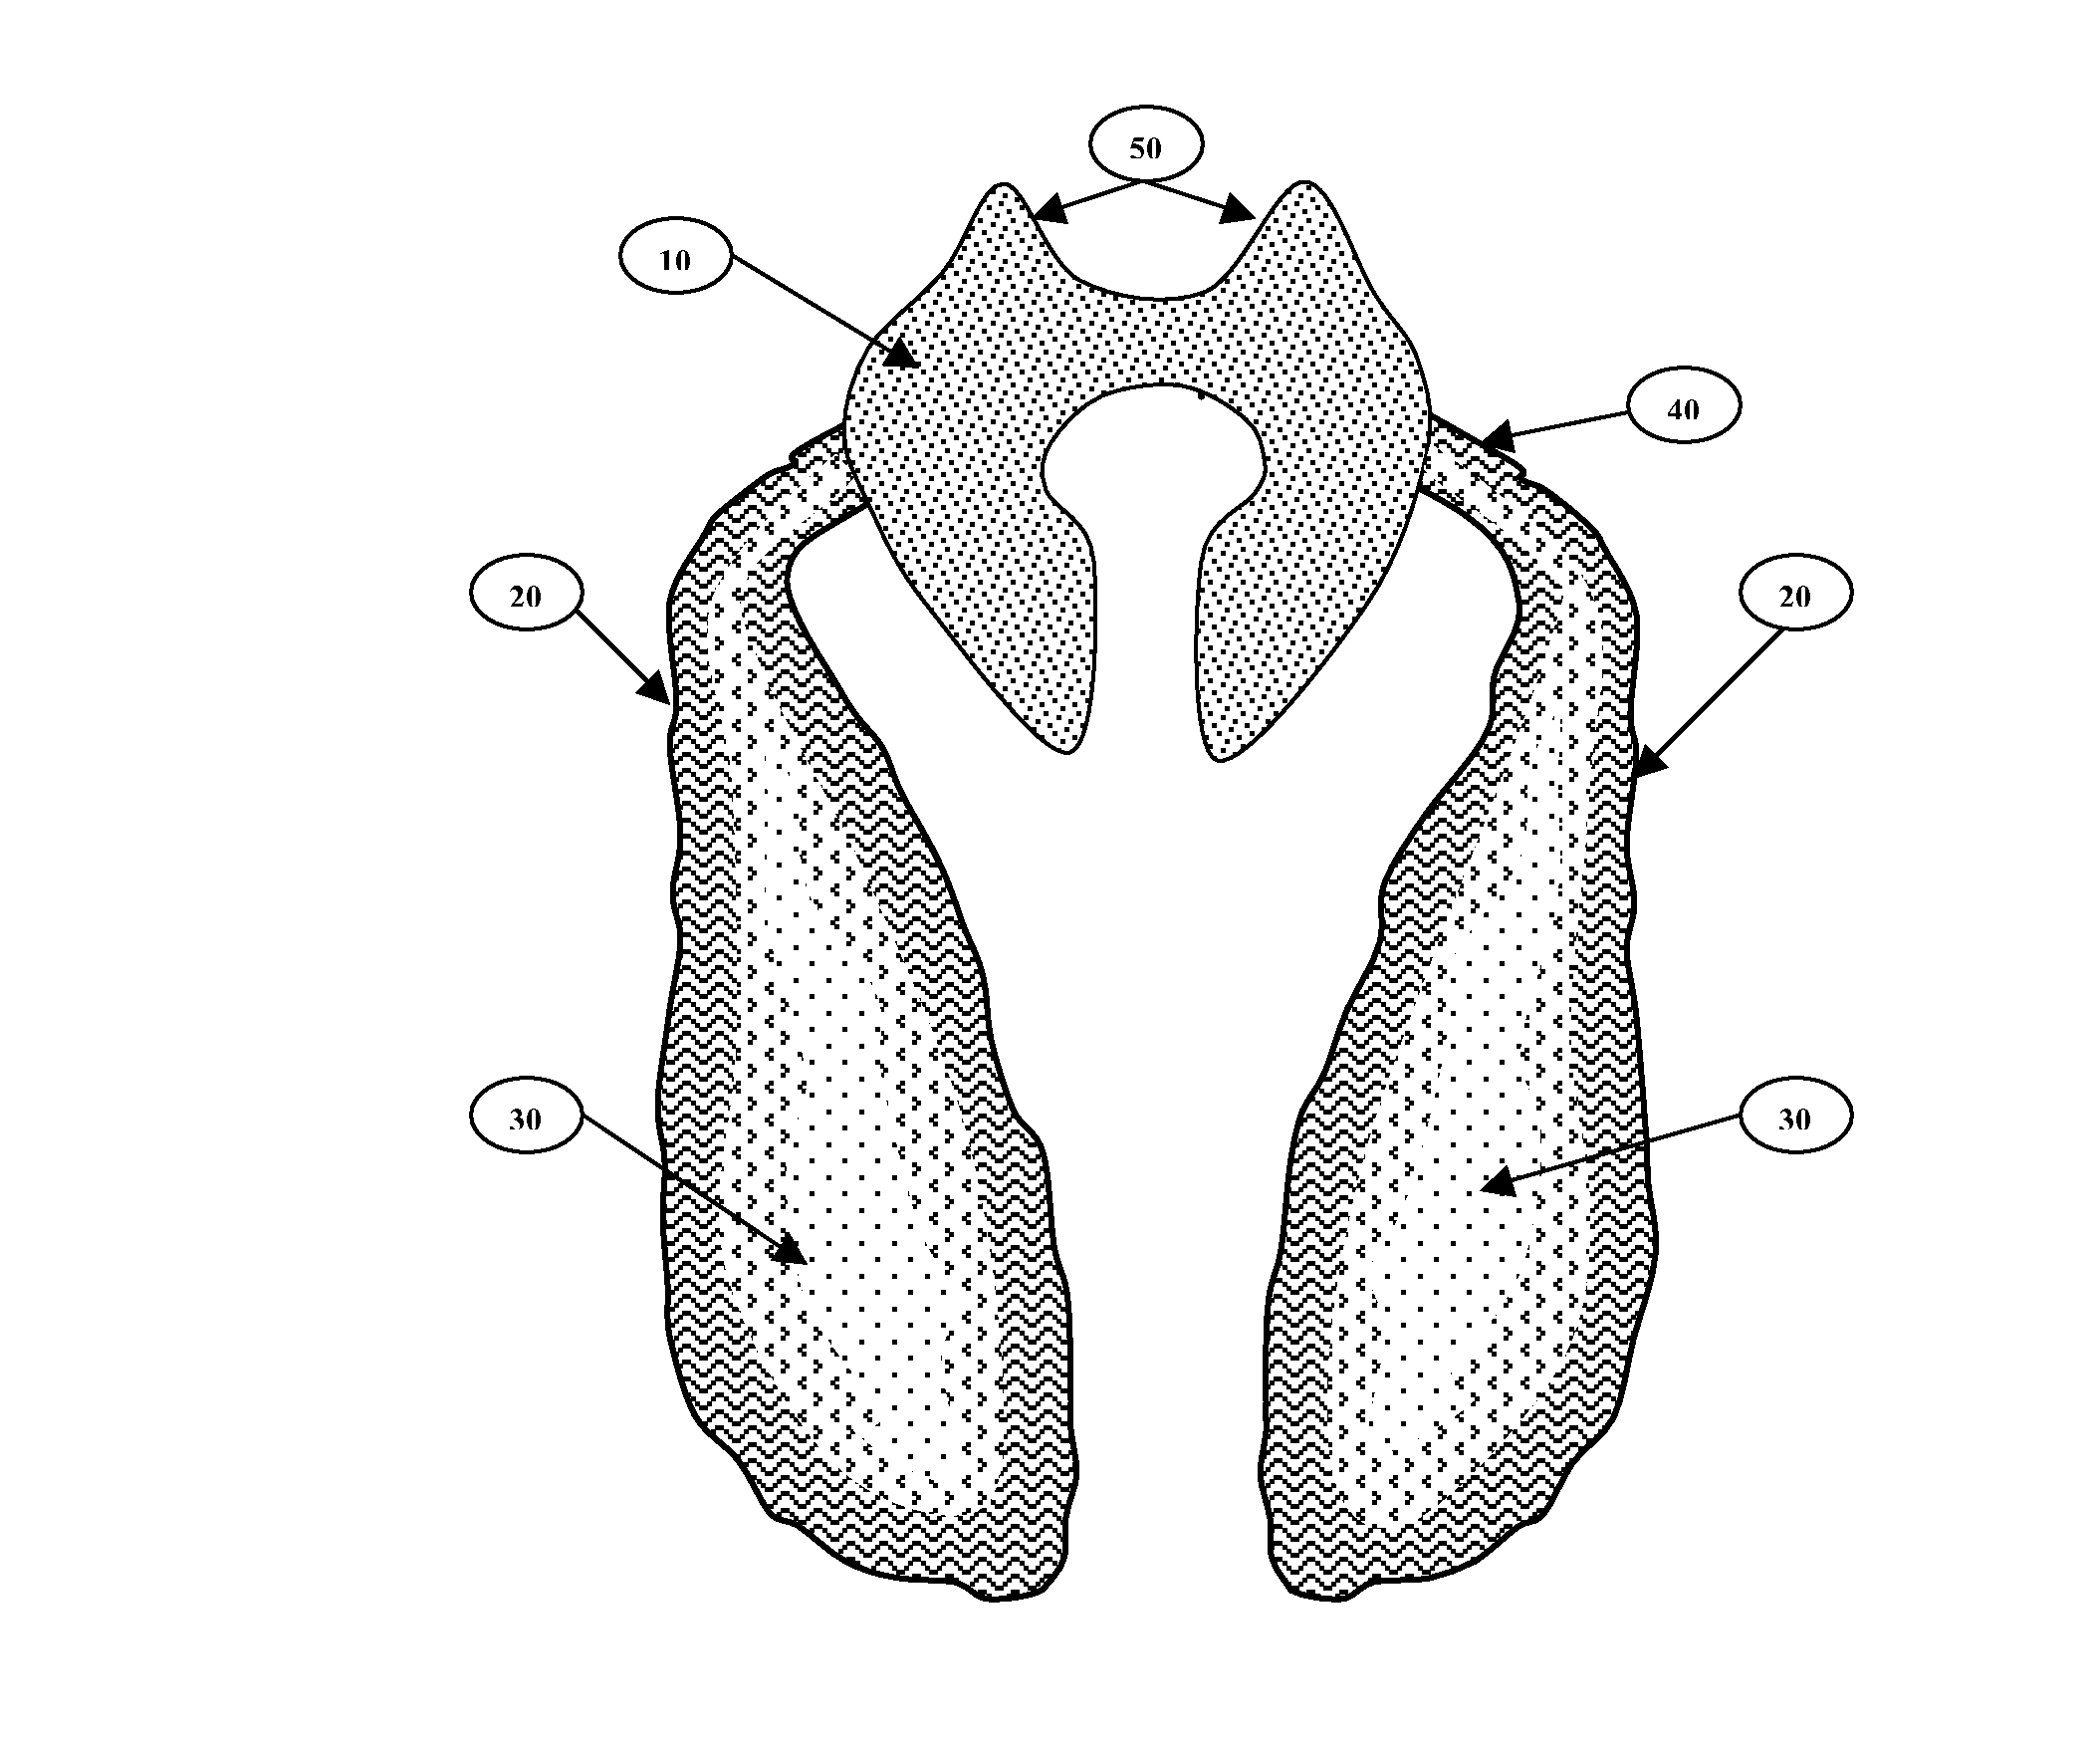 Body support device for sleeping in a seated position